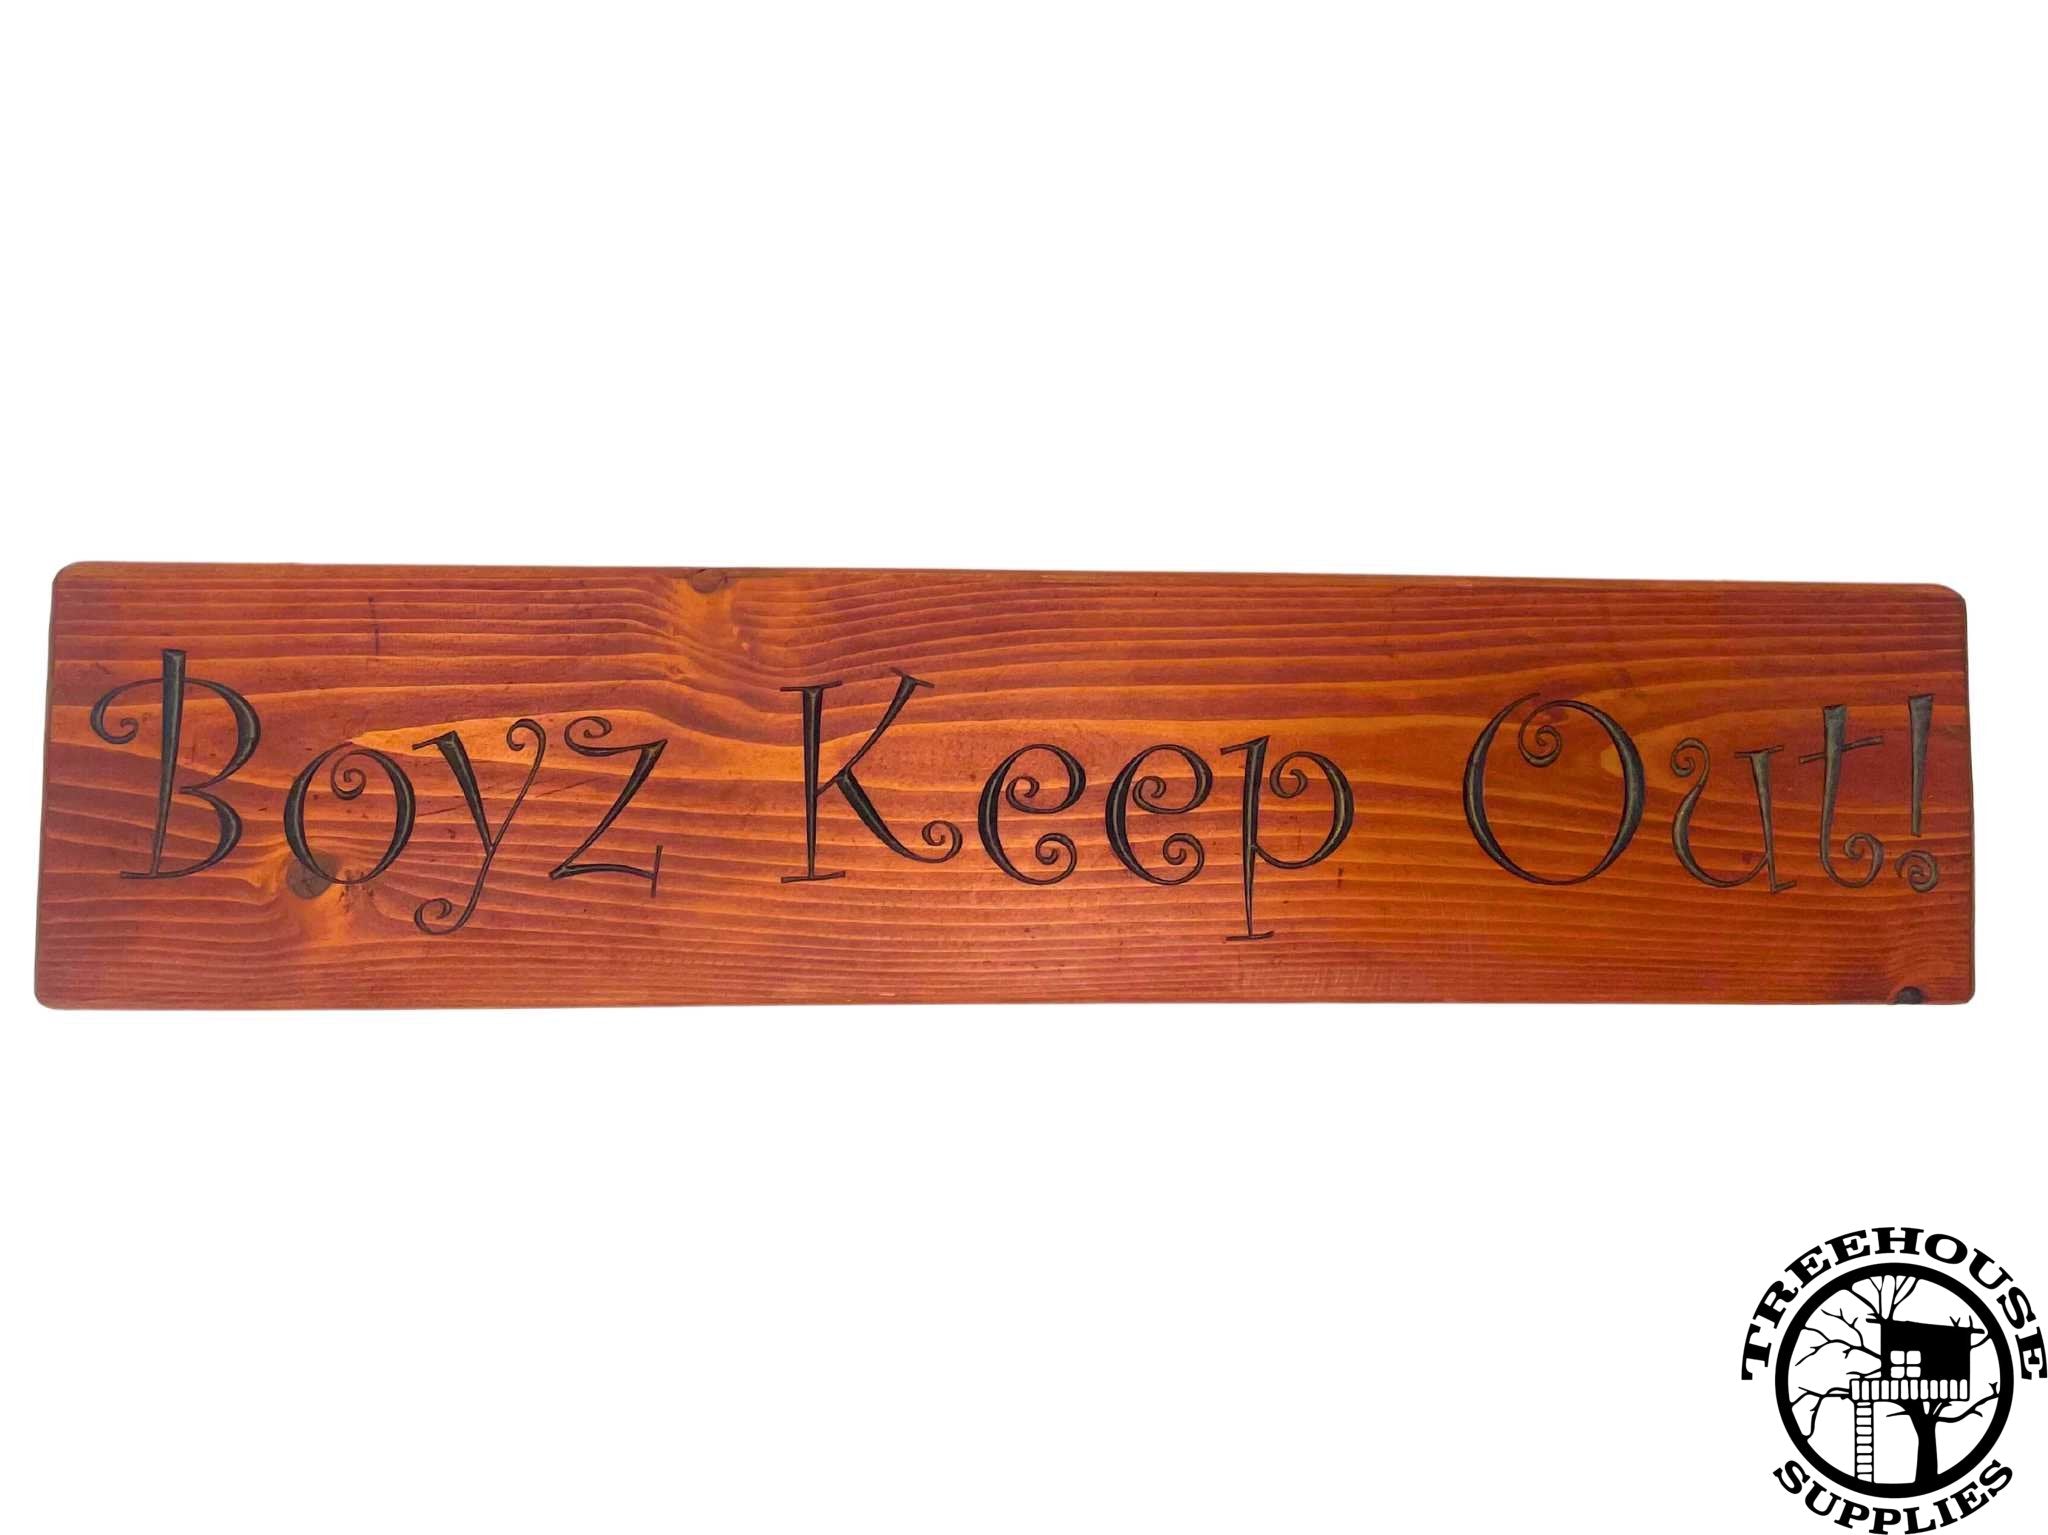 Two-foot long wooden sign with lettering with chestnut stain. engraved or carved text states Boyz Keep Out. White Background.